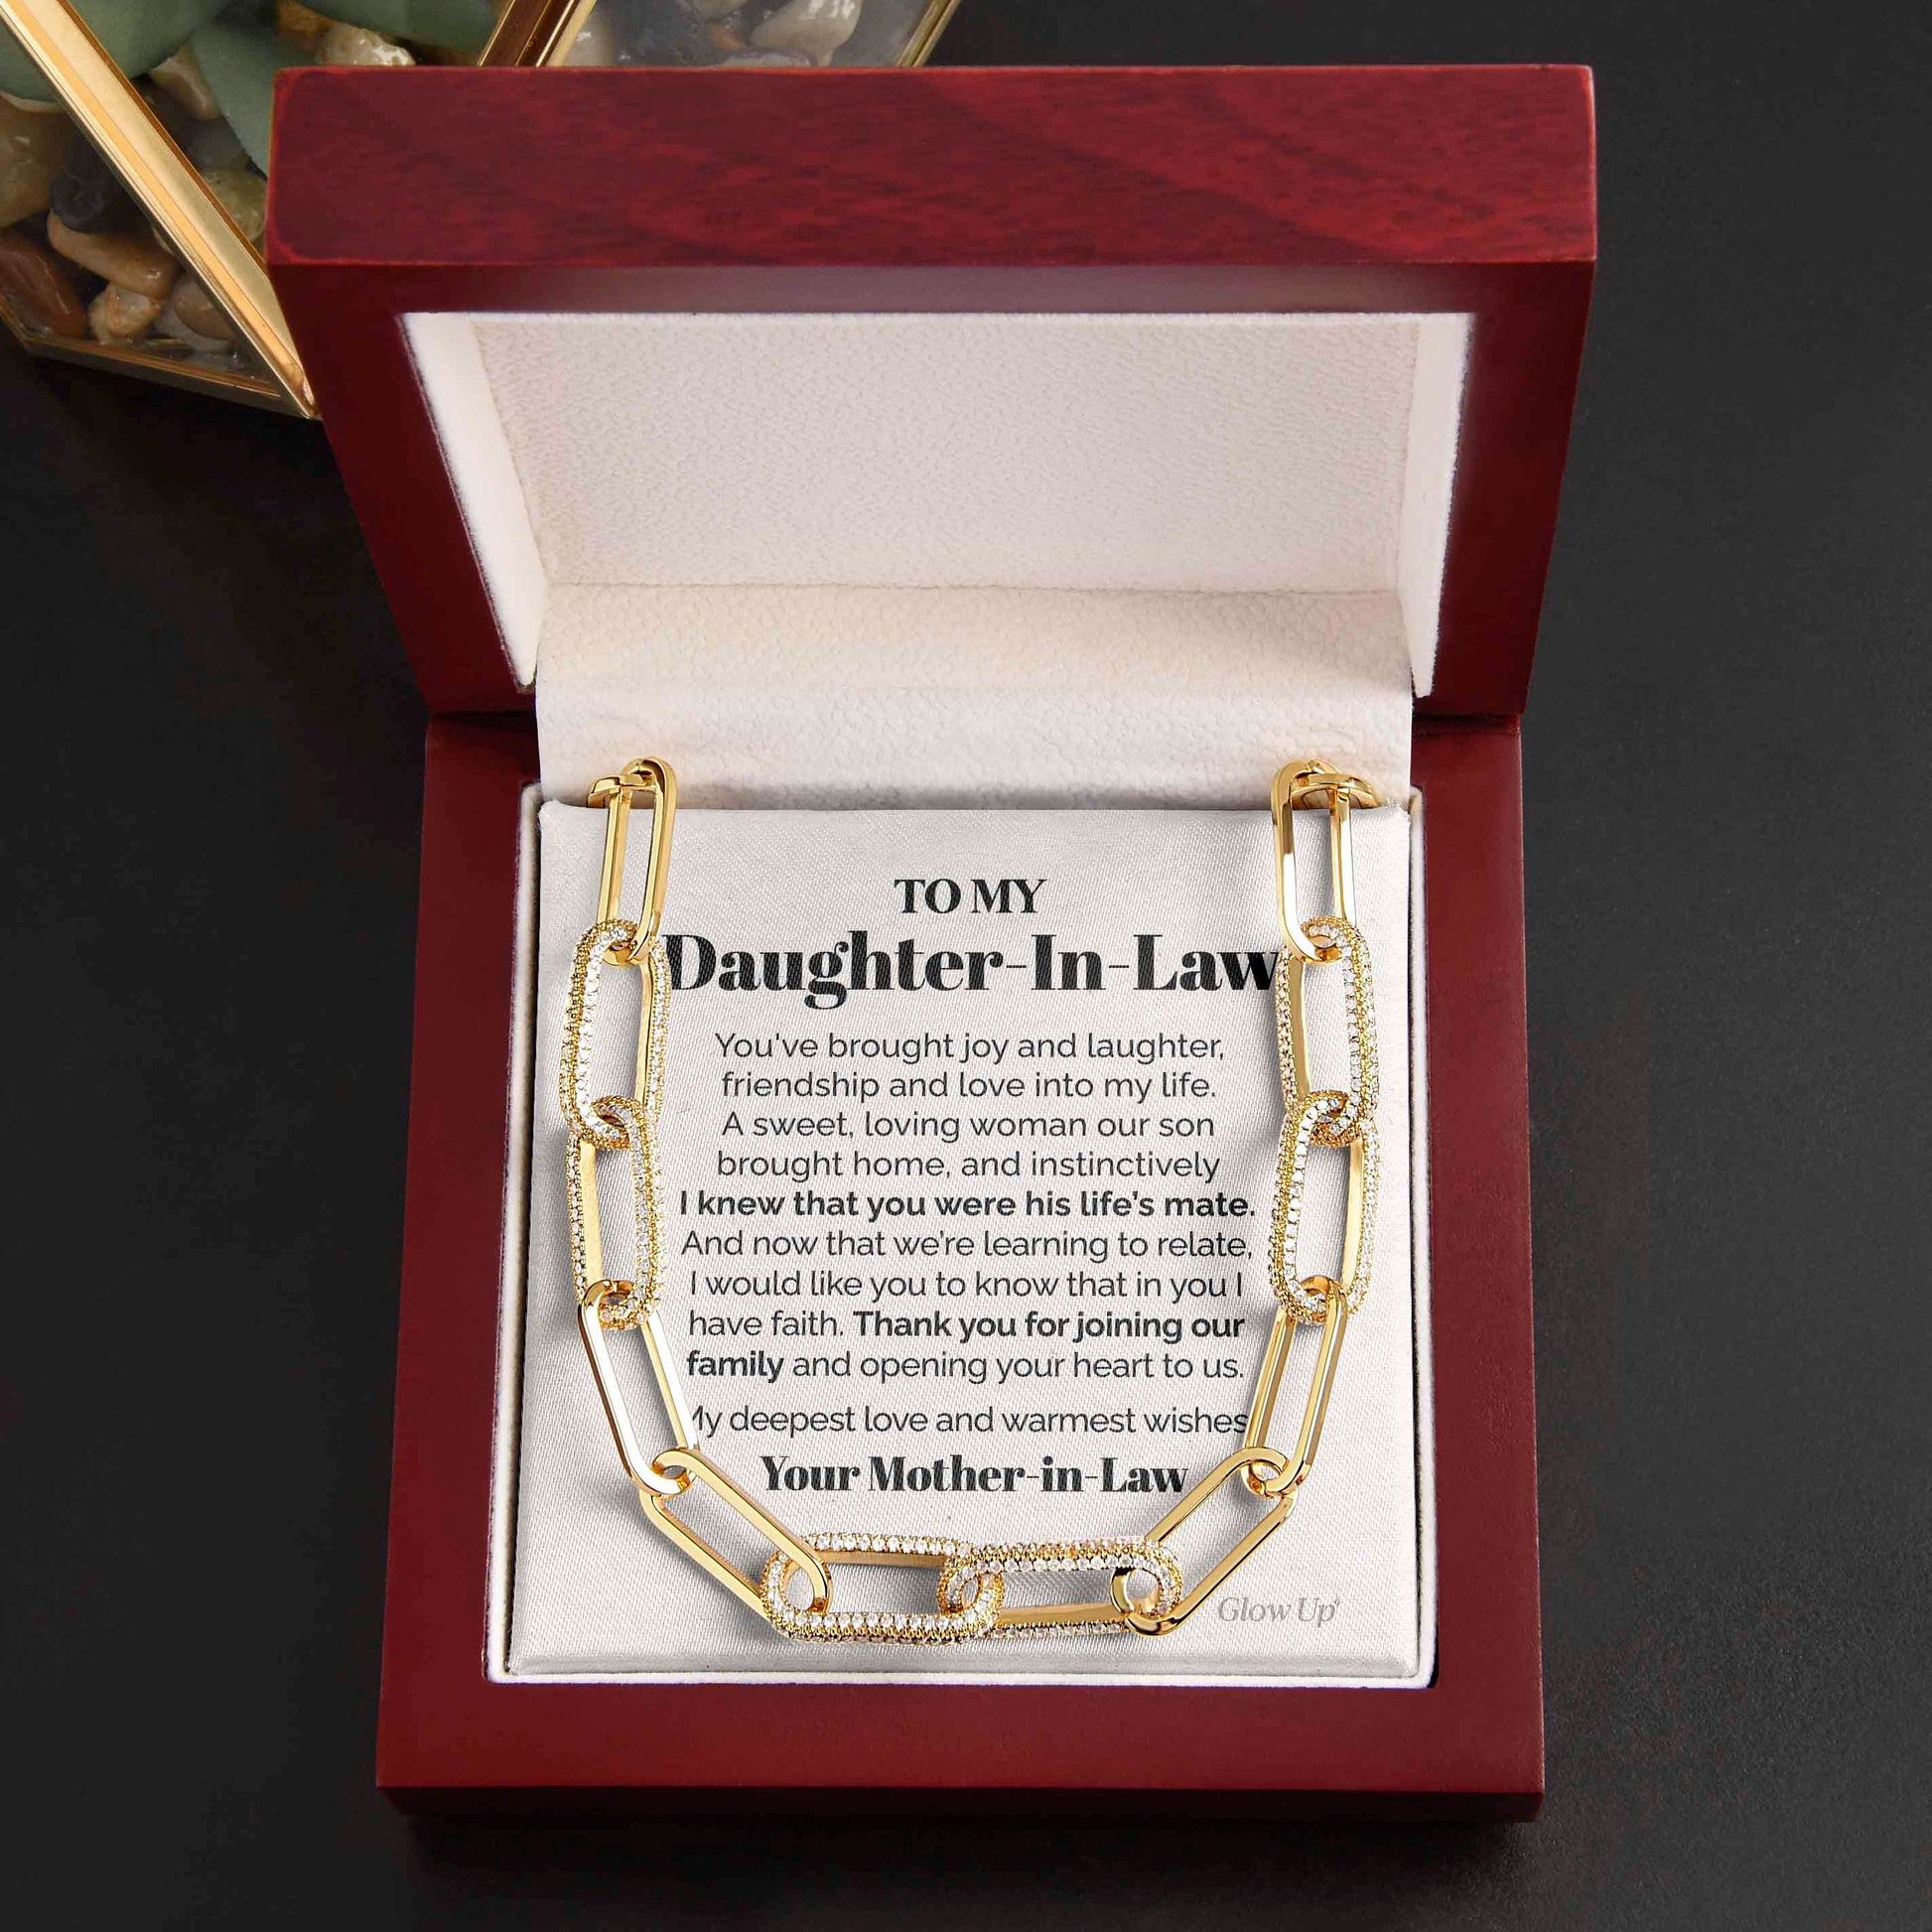 ShineOn Fulfillment Jewelry 14K White Gold Finish To my Daughter-In-Law - Thank you - Forever Linked Necklace